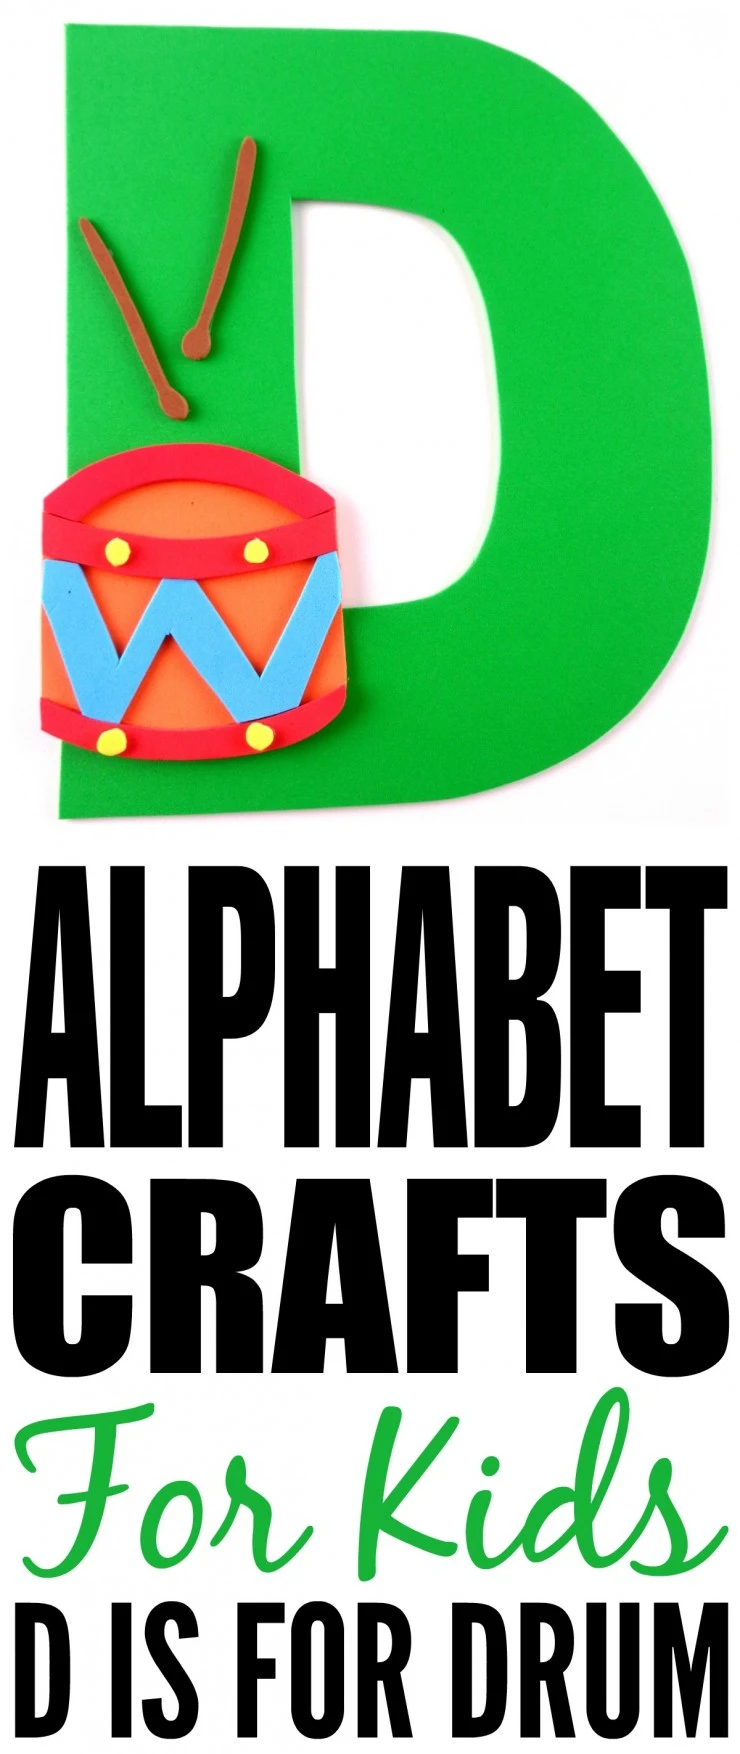 This week is my series of ABCs kids crafts featuring the Alphabet, we are doing a D is for Drum craft. These Alphabet Crafts For Kids are a fun way to introduce your child to the alphabet.